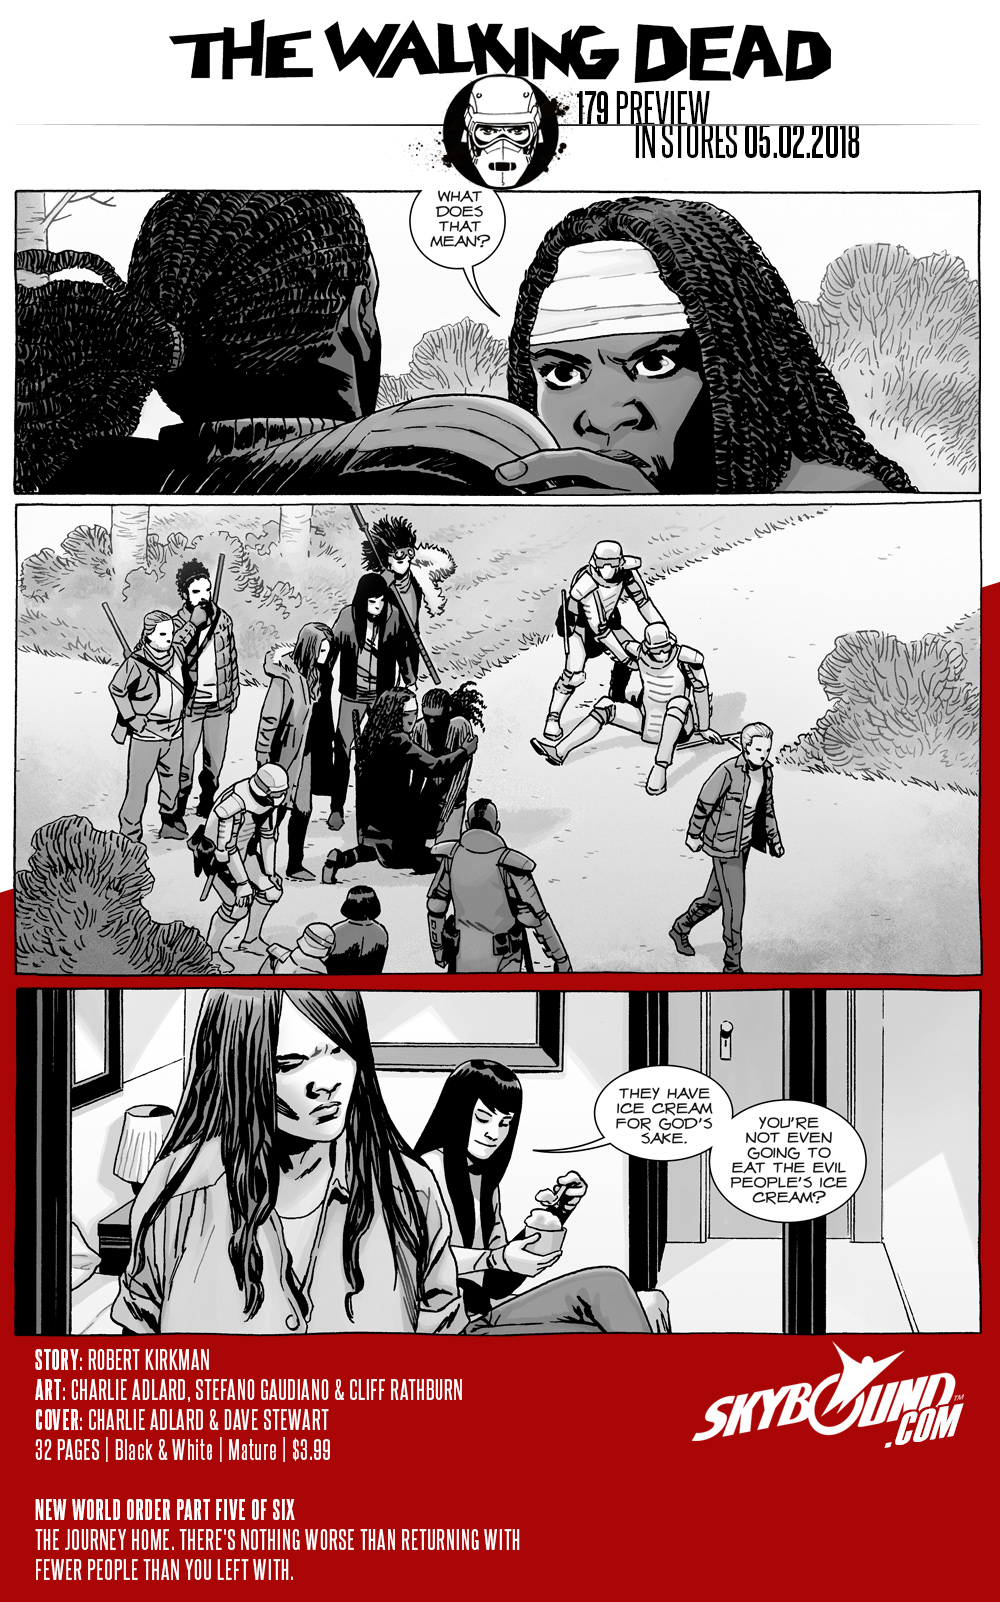 the-walking-dead-179-preview